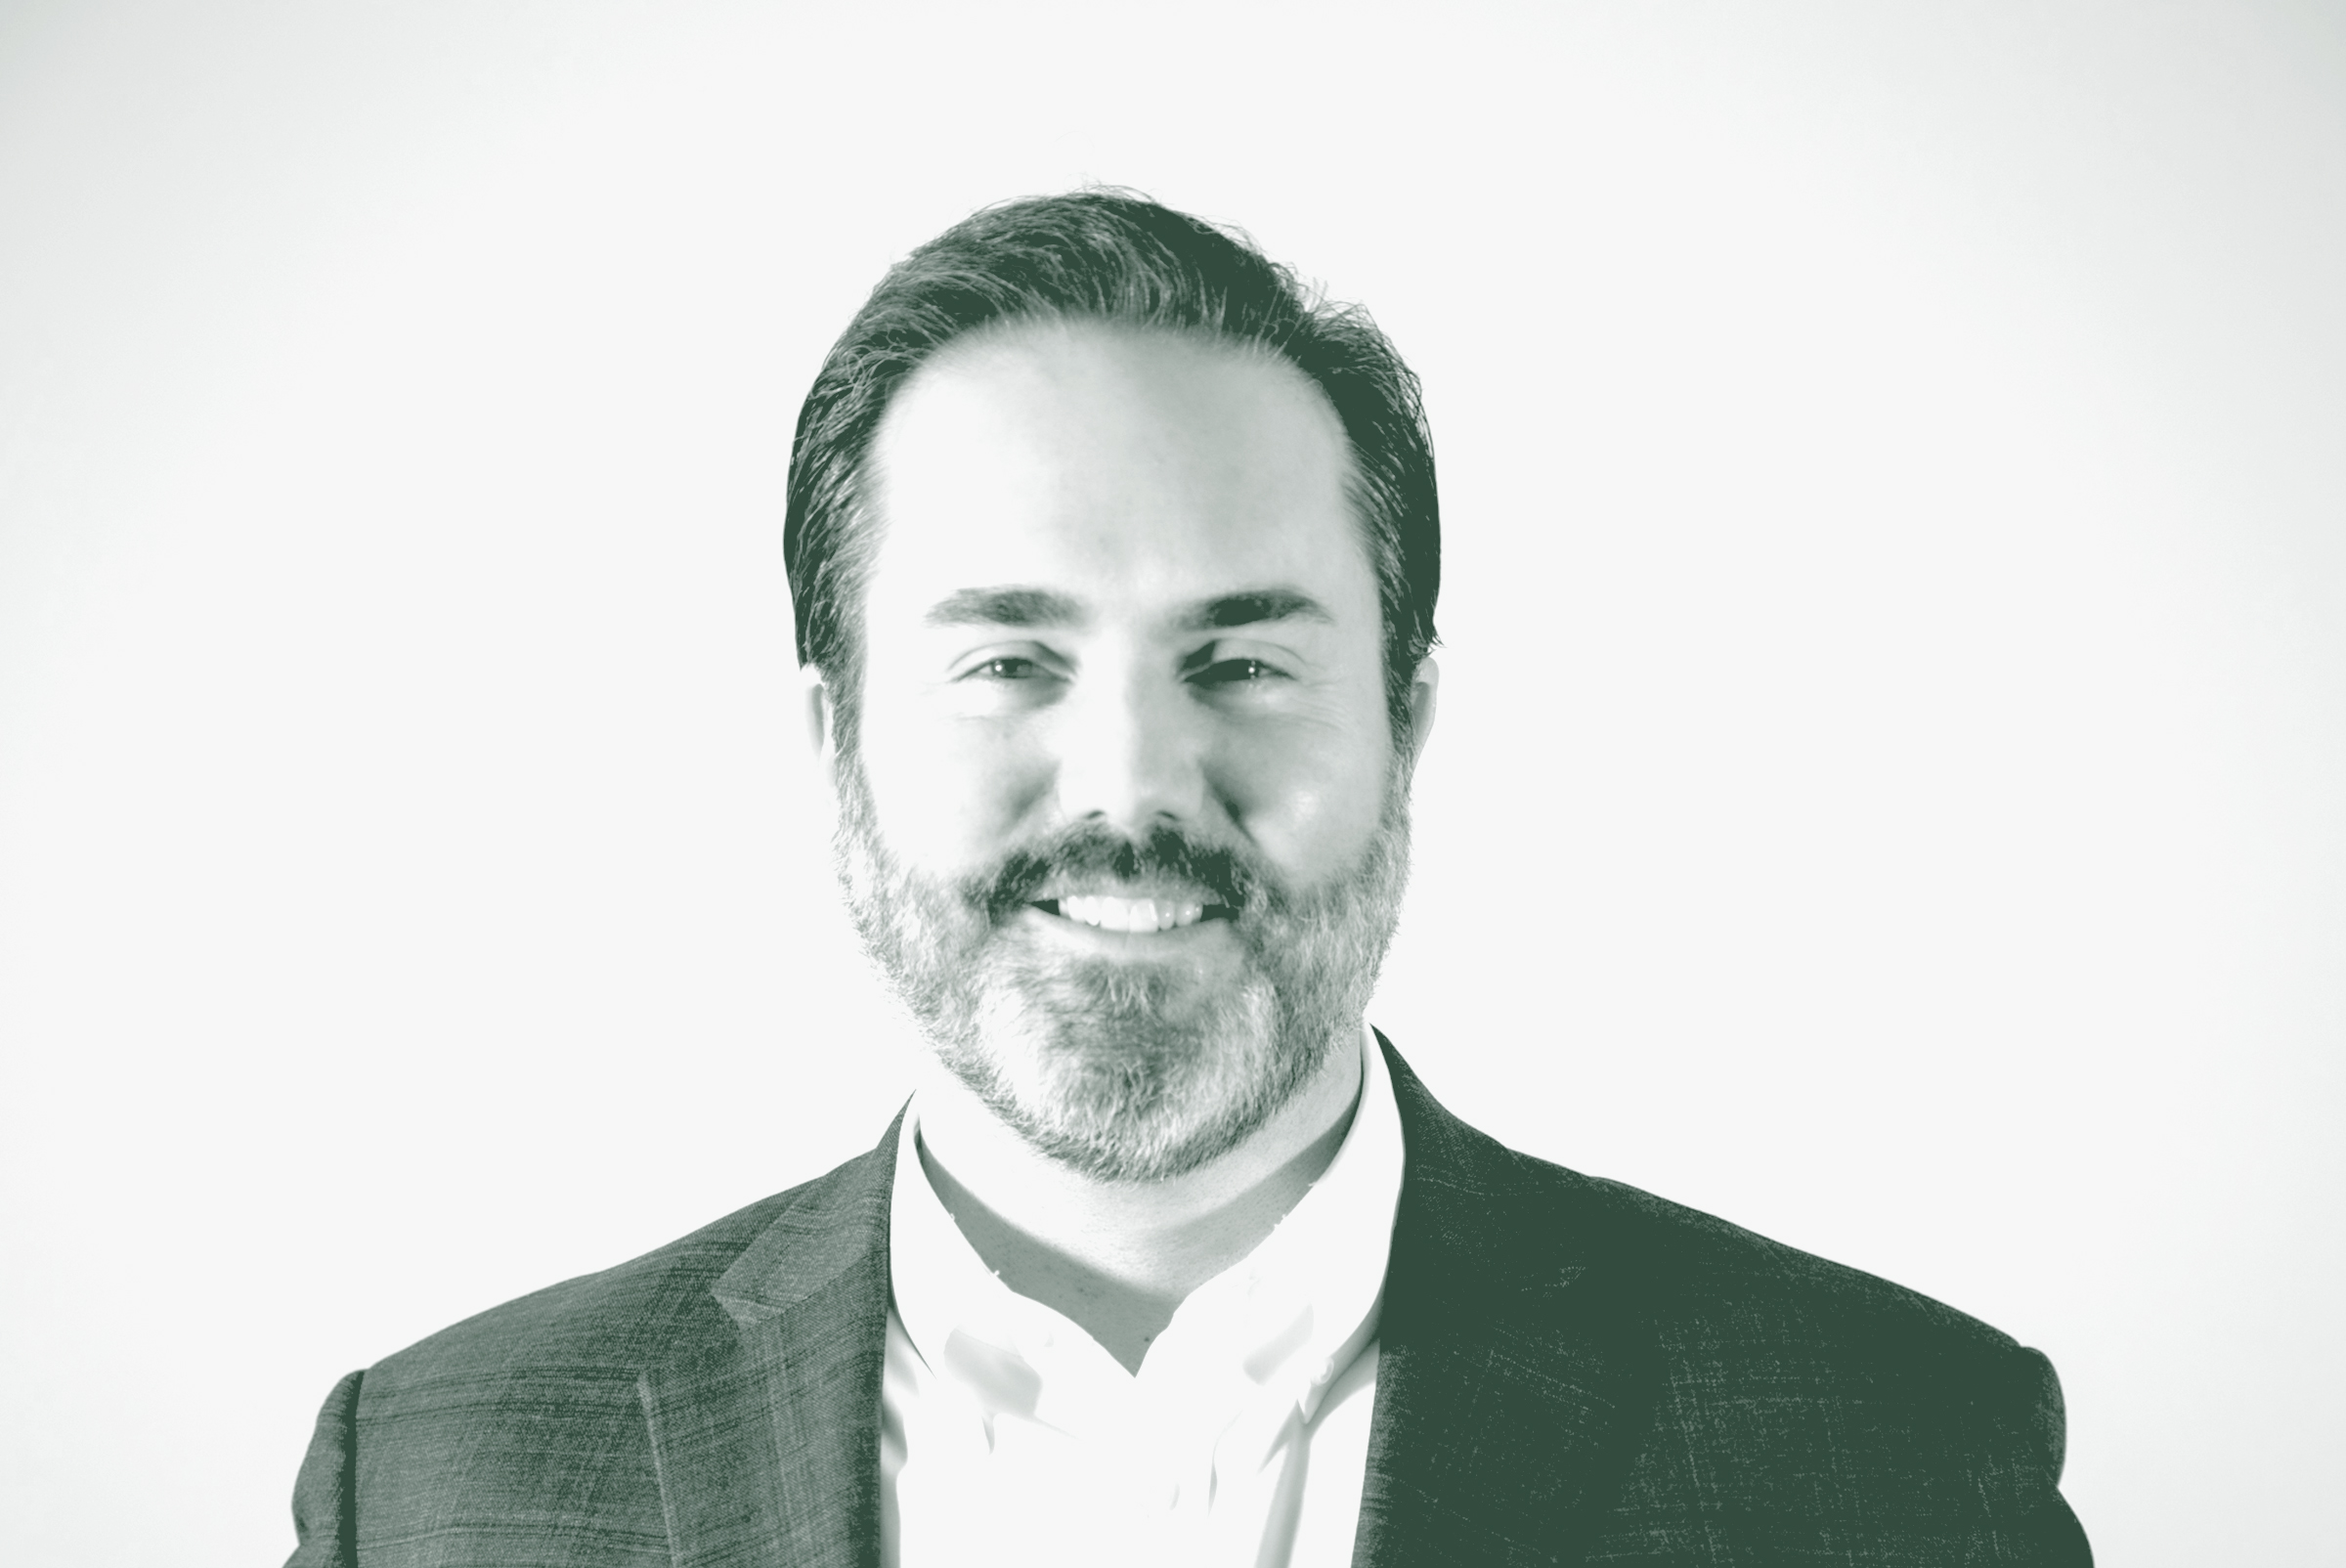 A black and white portrait of Todd Burtis, a Design Principal with GFF, in front of a white background.